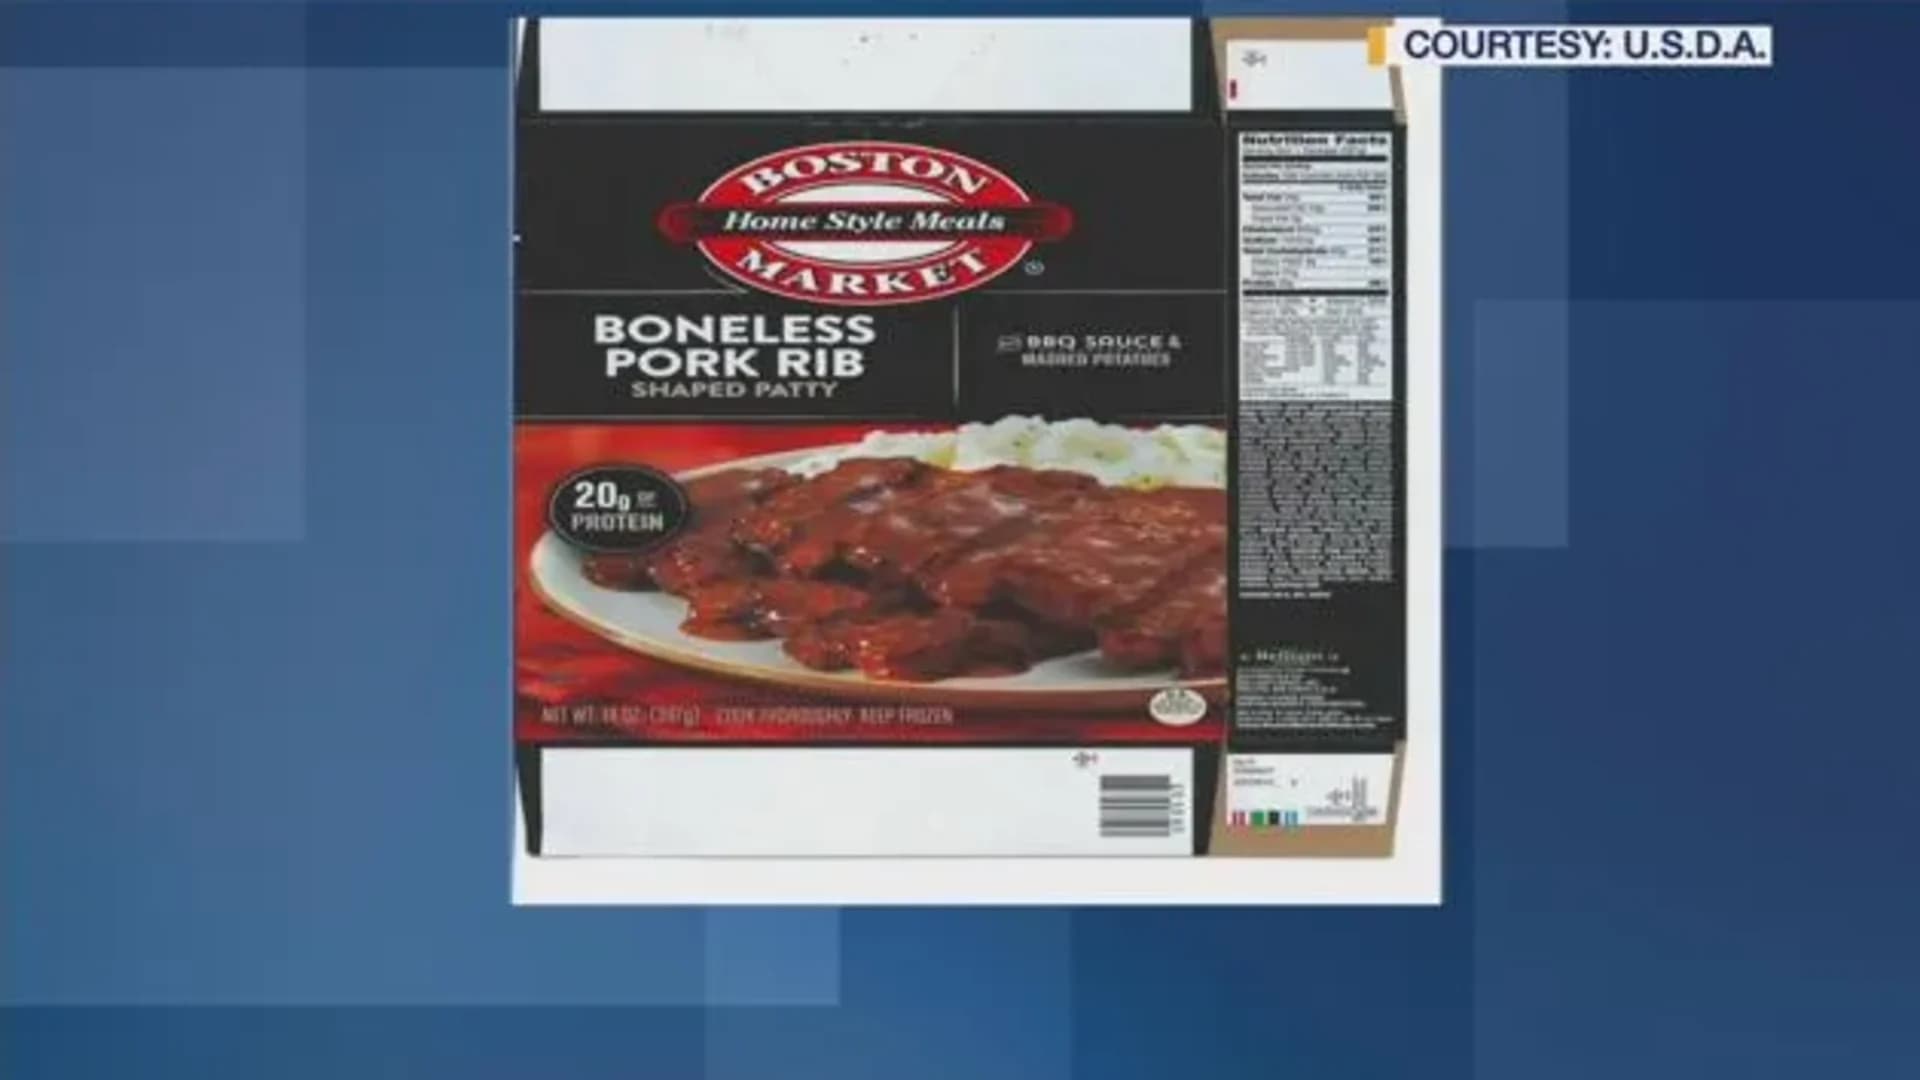 Over 86 tons of frozen Boston Market dinners recalled over glass concerns